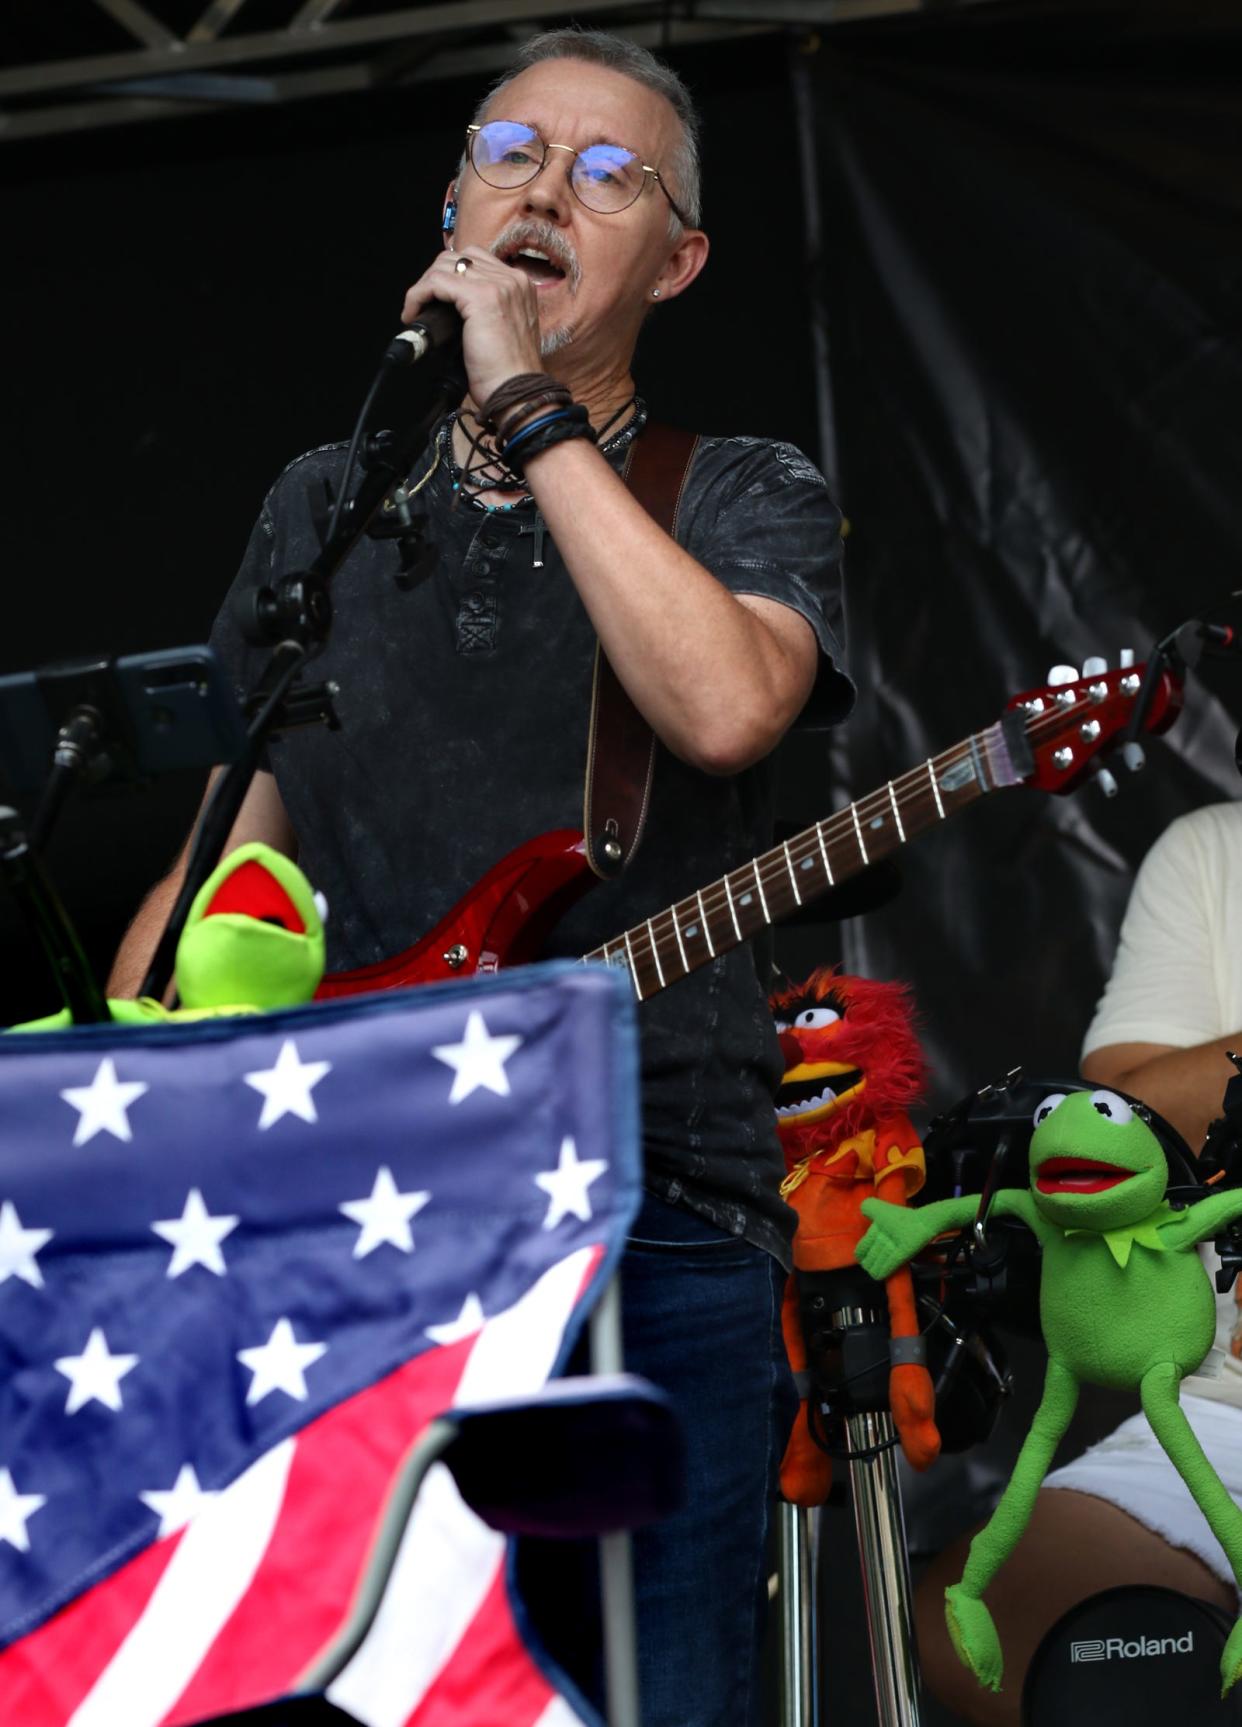 Tangerine Trees’ lead singer, Roger Leonhardt, sings the national anthem at the opening of North Carolina American Legion 7th Inning Stretch Festival held Saturday, Aug. 6, 2022, in Uptown Shelby.